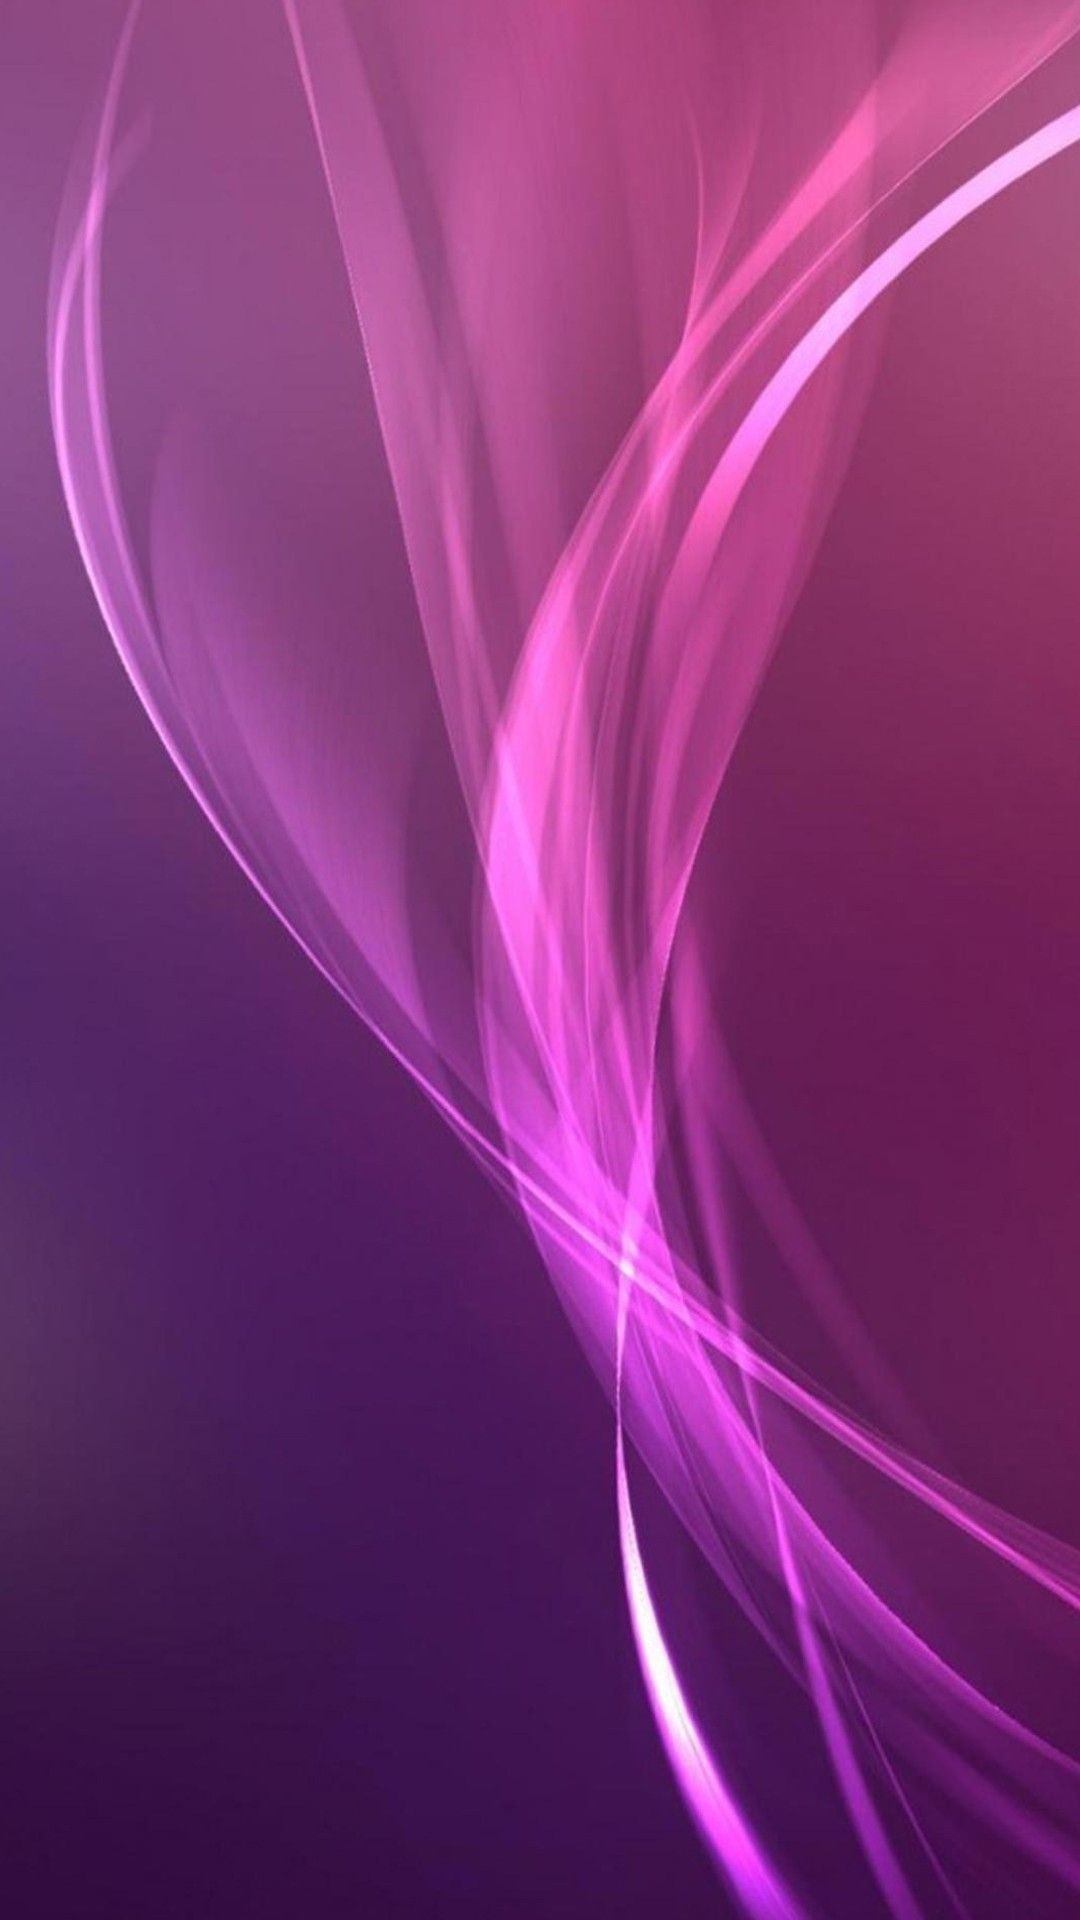 1080x1920 Download Purple Wallpapers Mobile Phone HD Free Images .